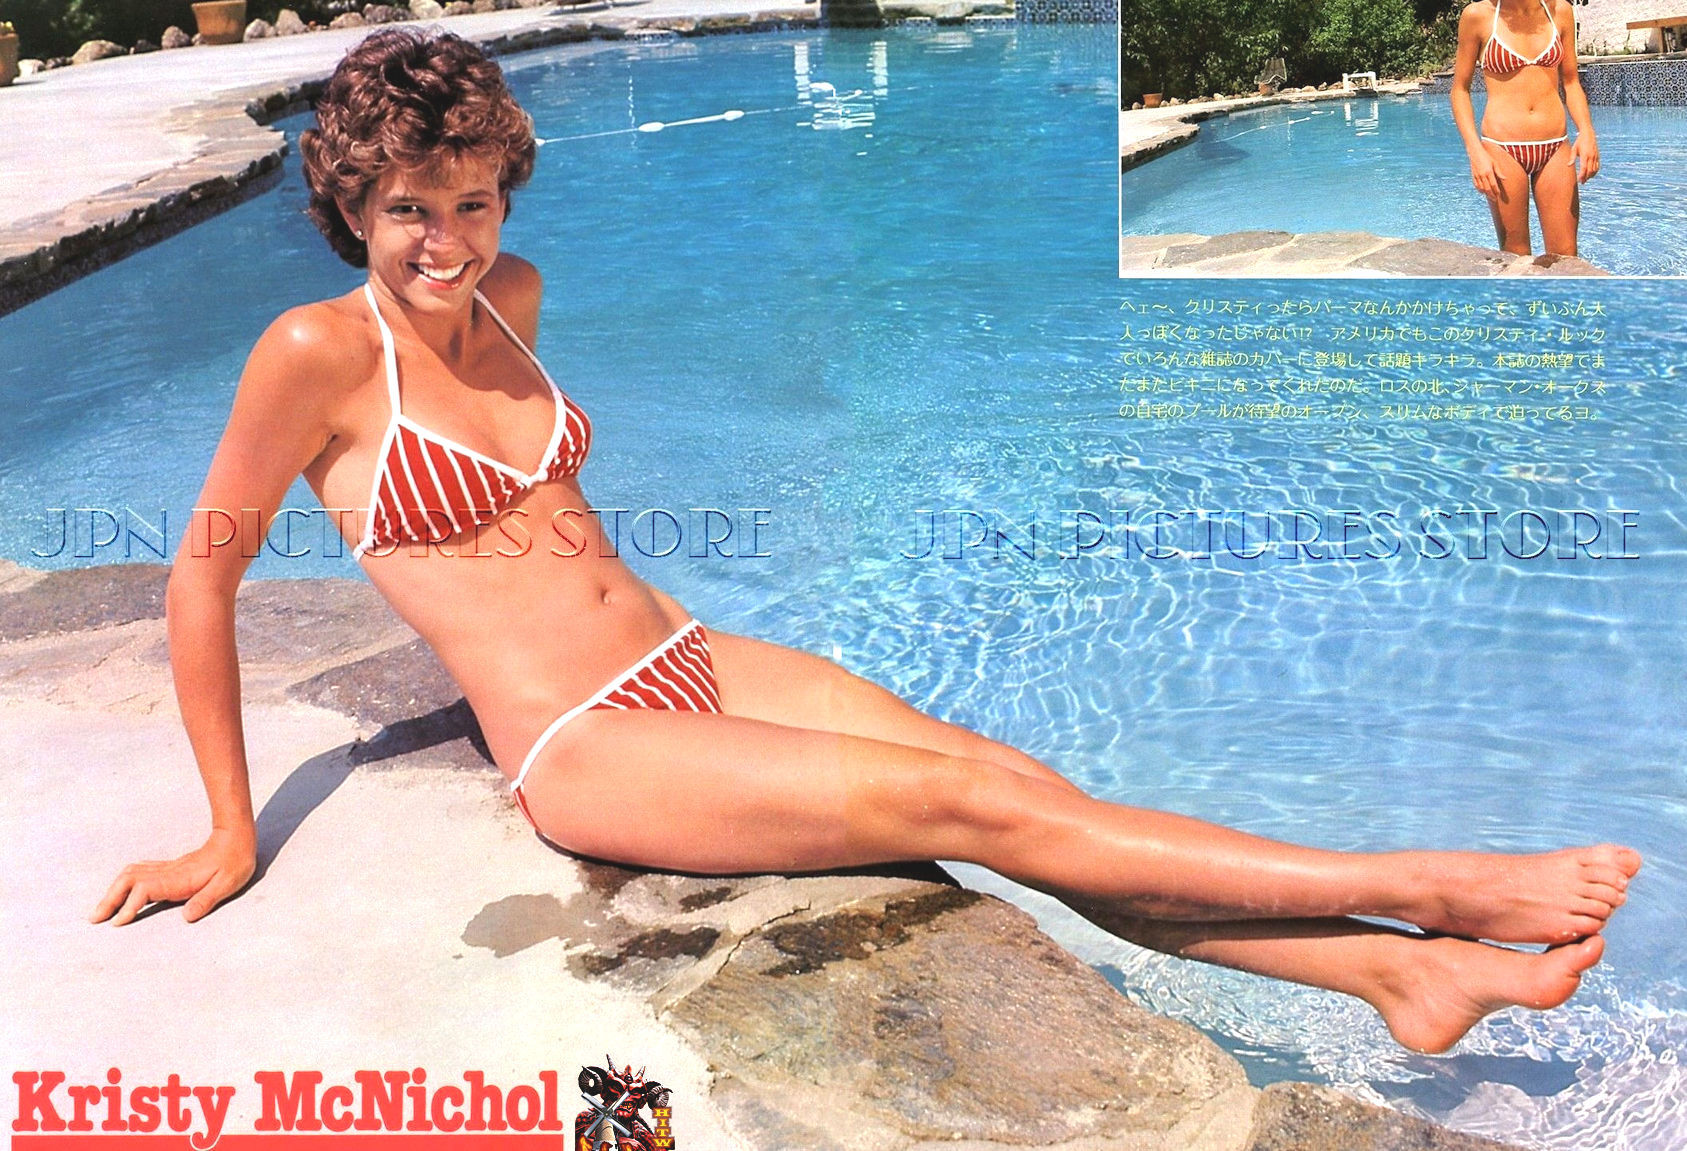 People who liked Kristy McNichol's feet, also liked.